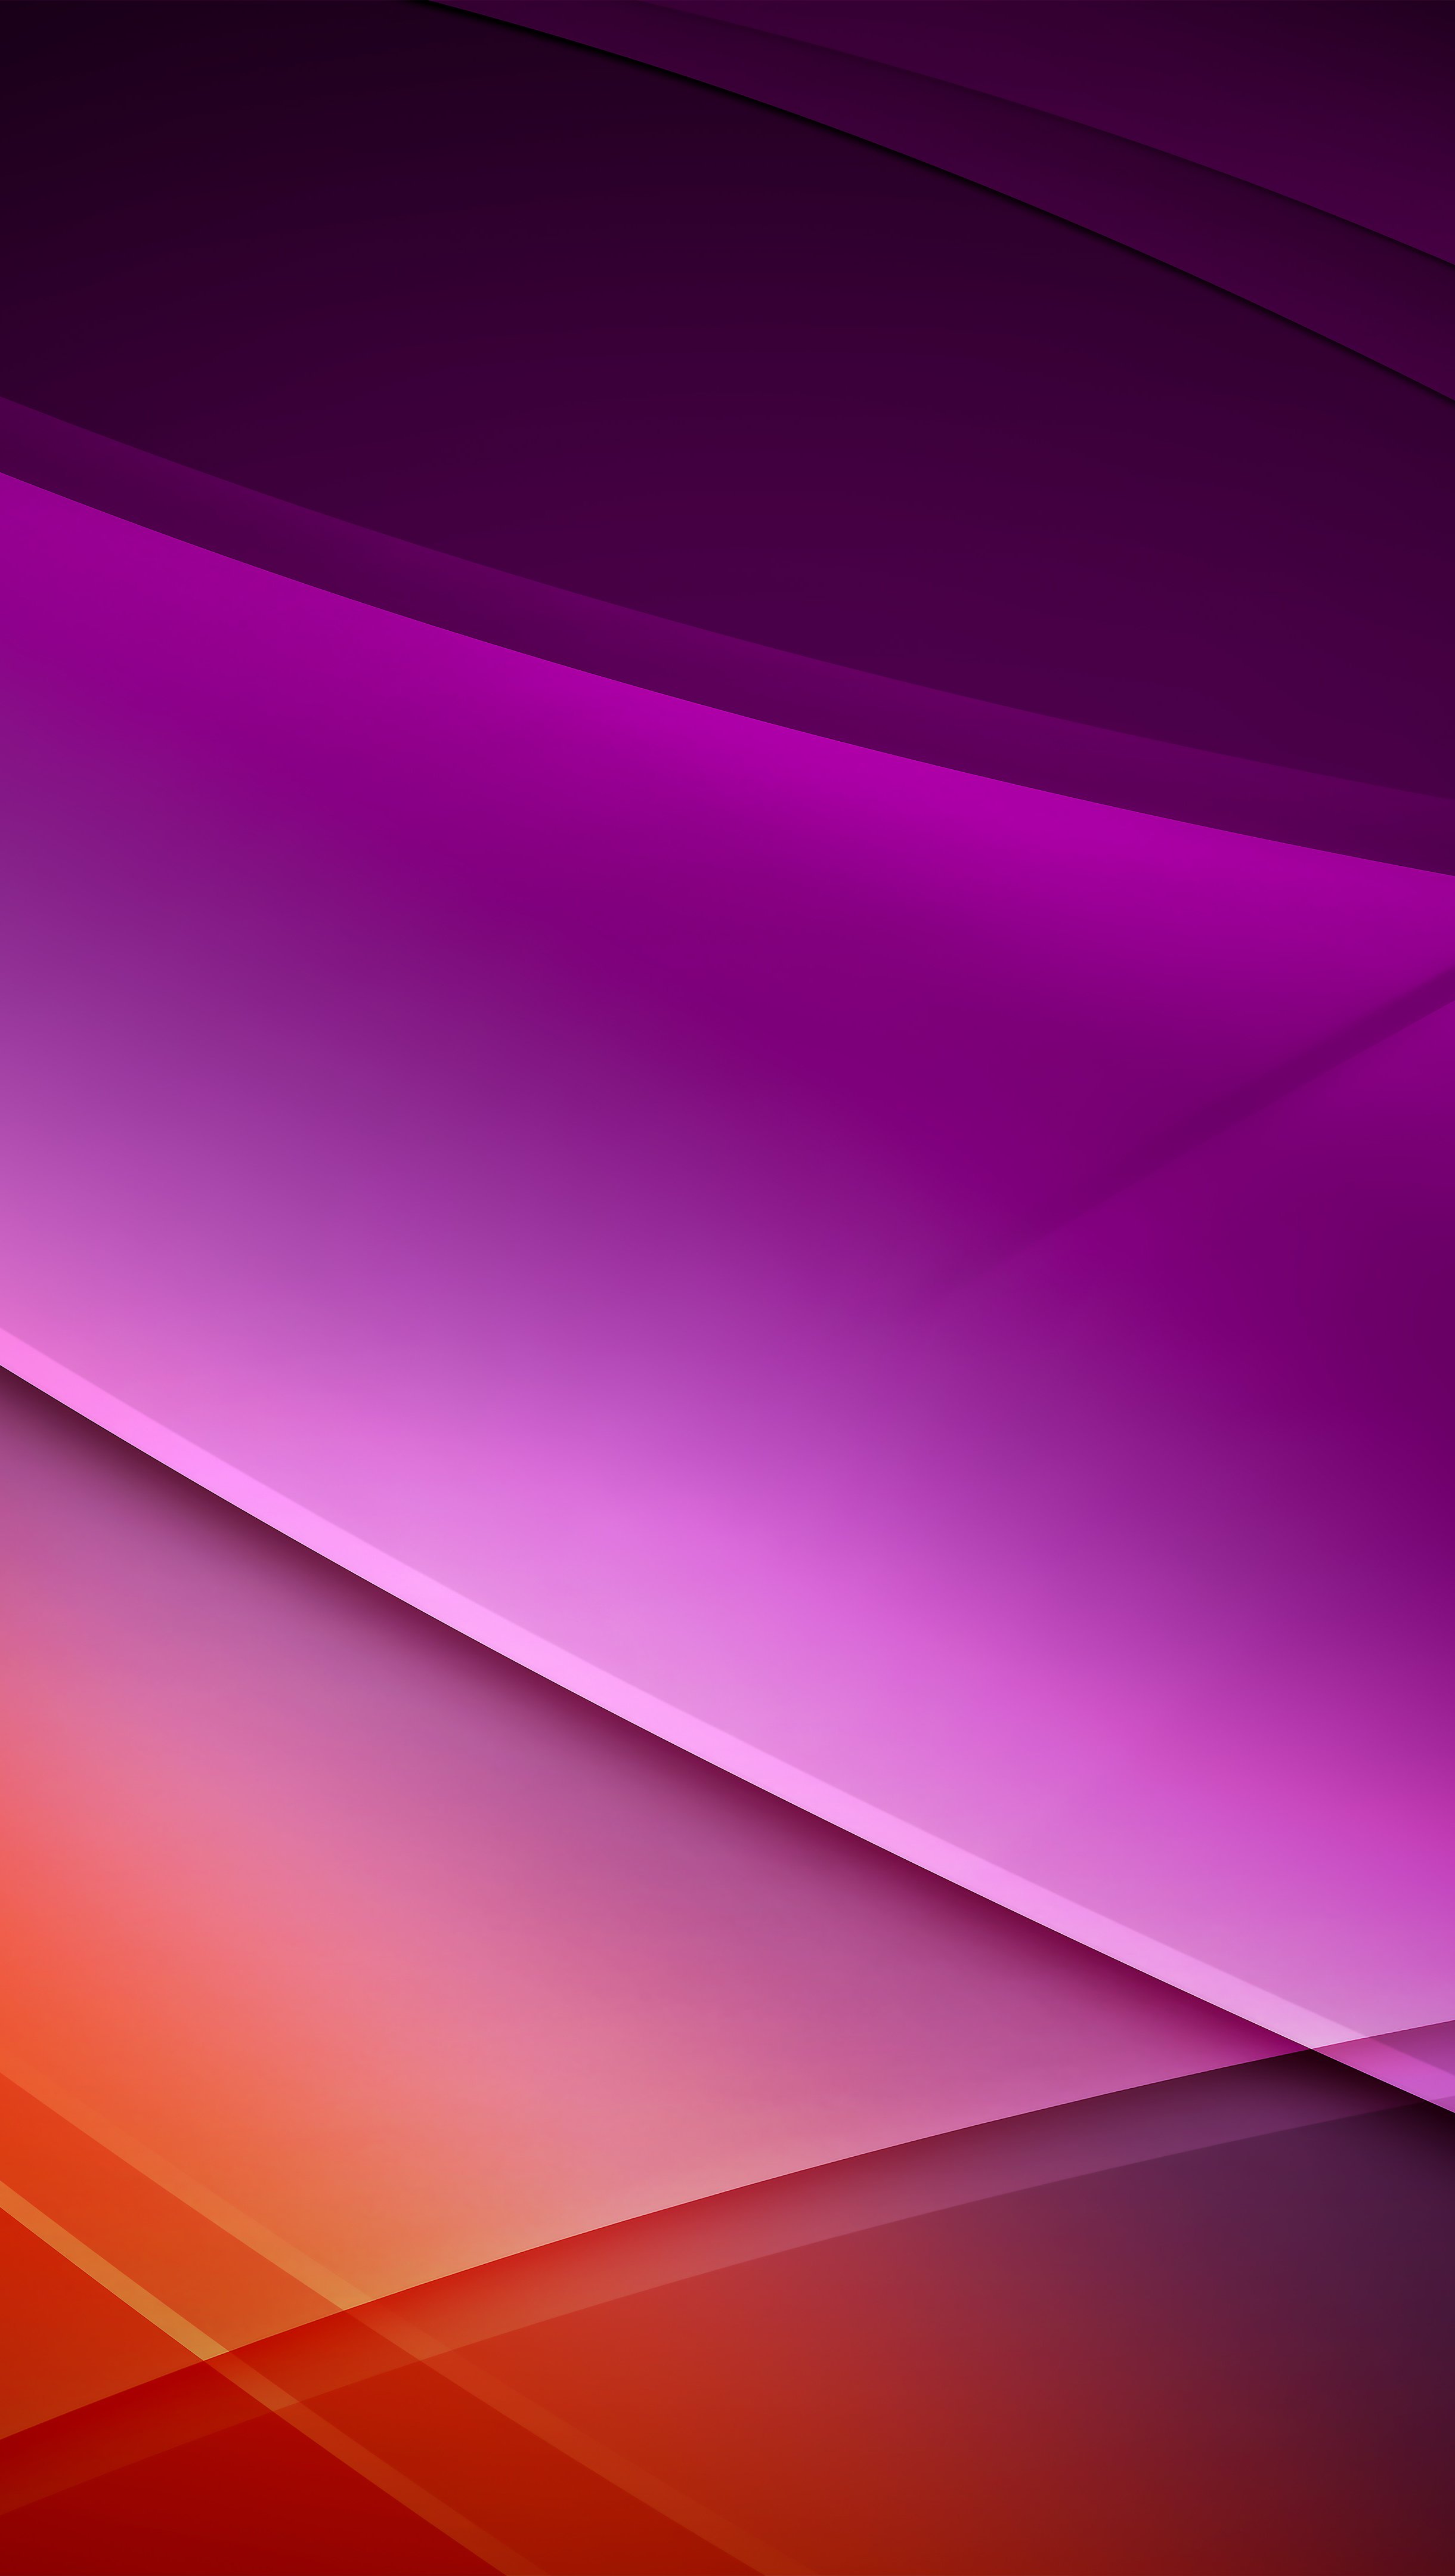 Shapes and lines in red and purple Wallpaper 8k Ultra HD ID:7845